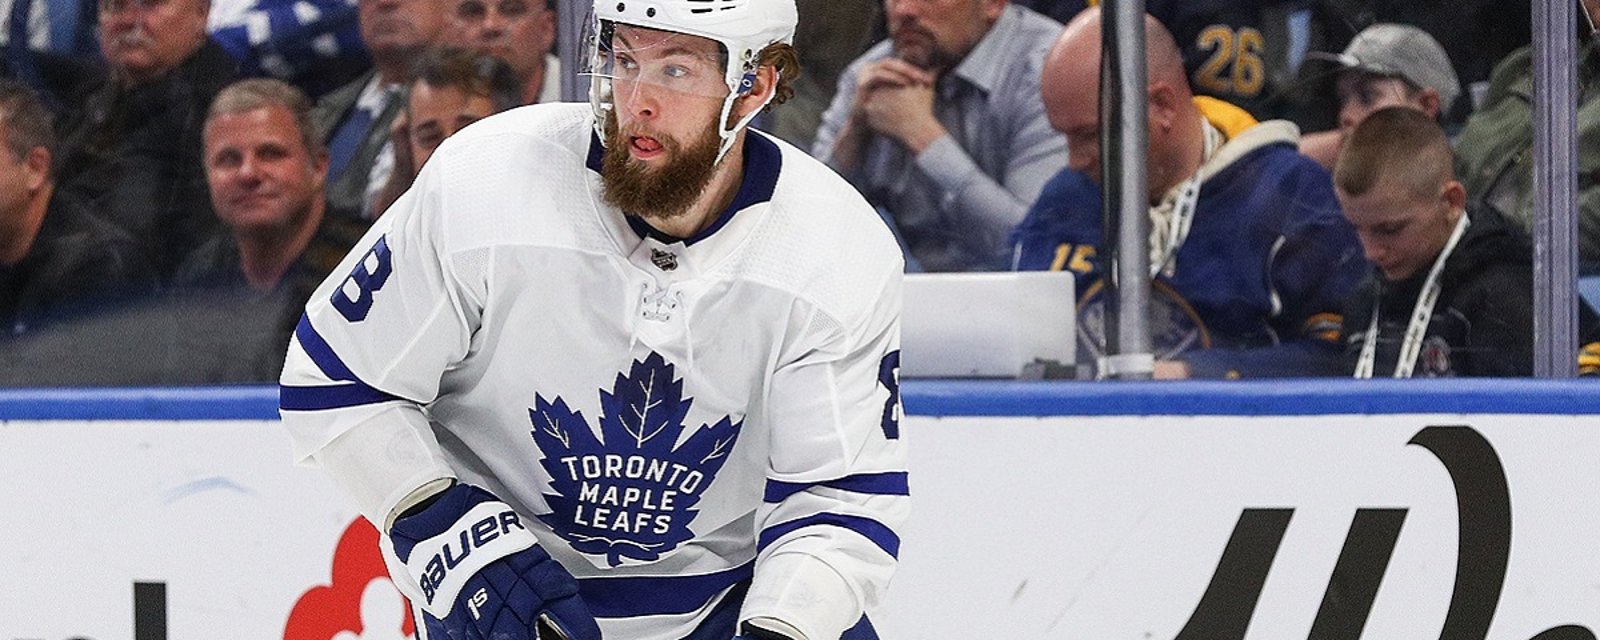 Breaking: Two Maple Leafs missing from practice this morning.